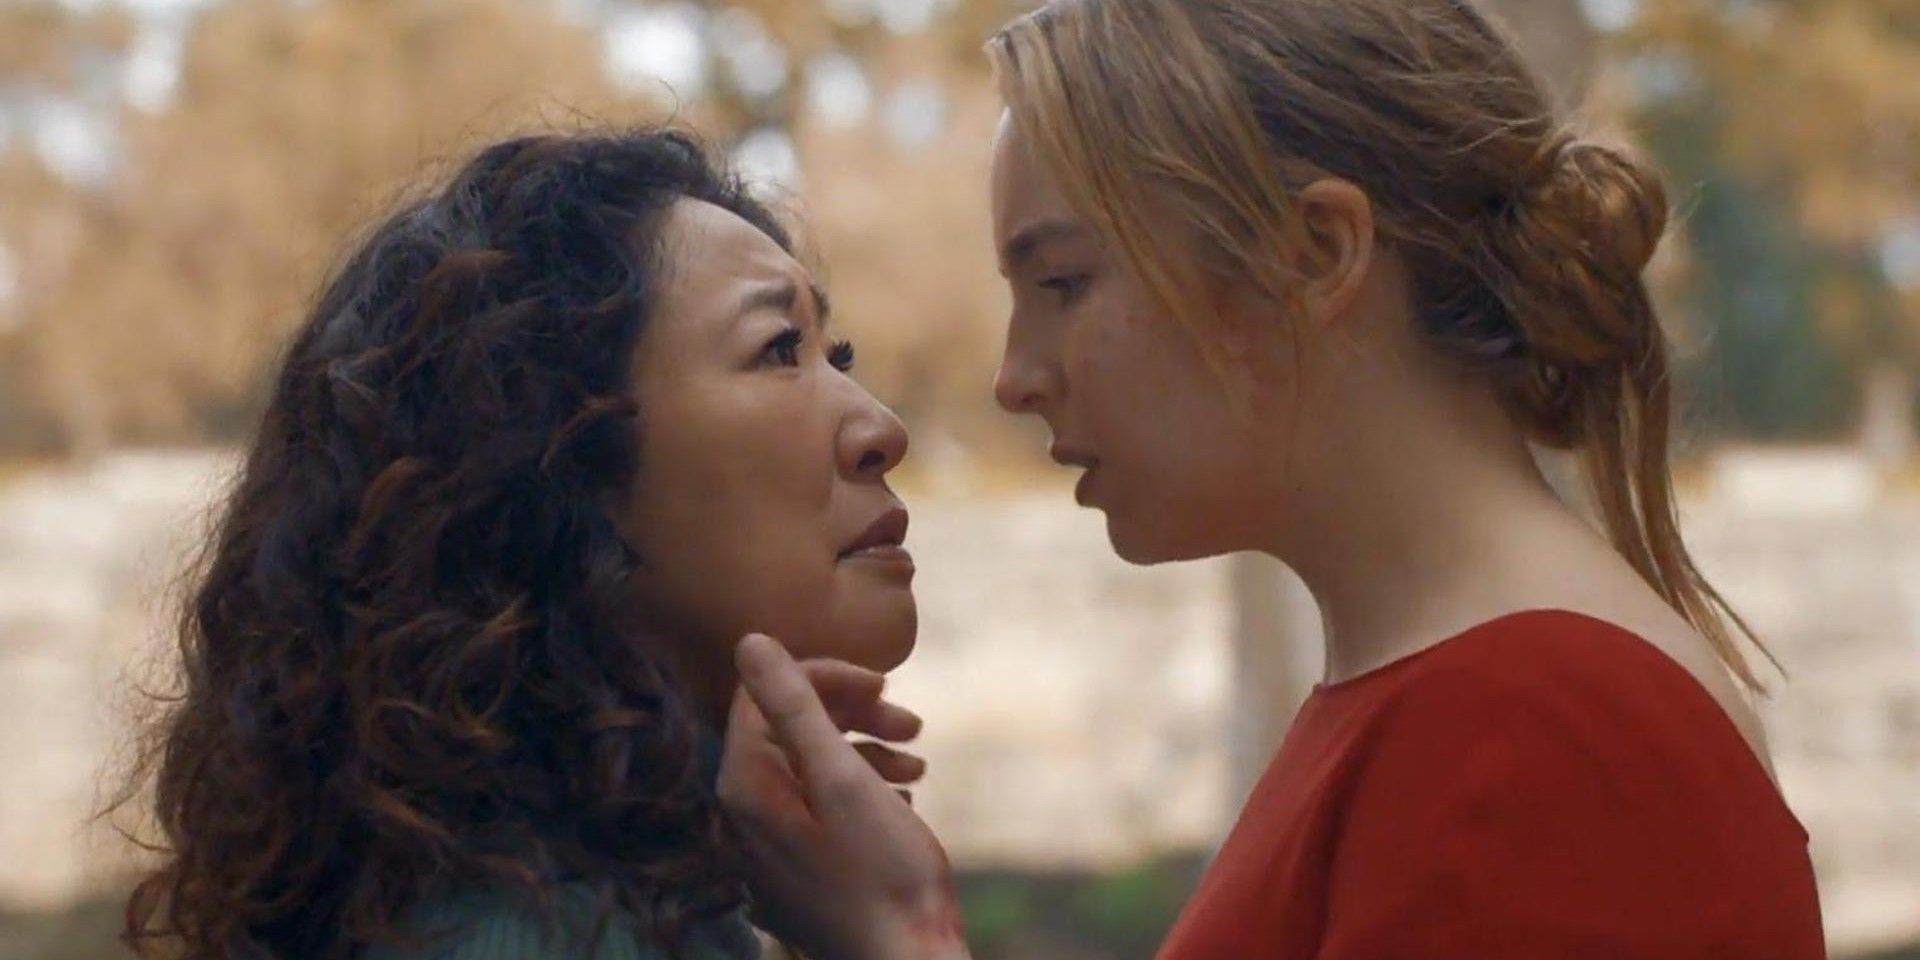 Villanelle and Eve share a moment together